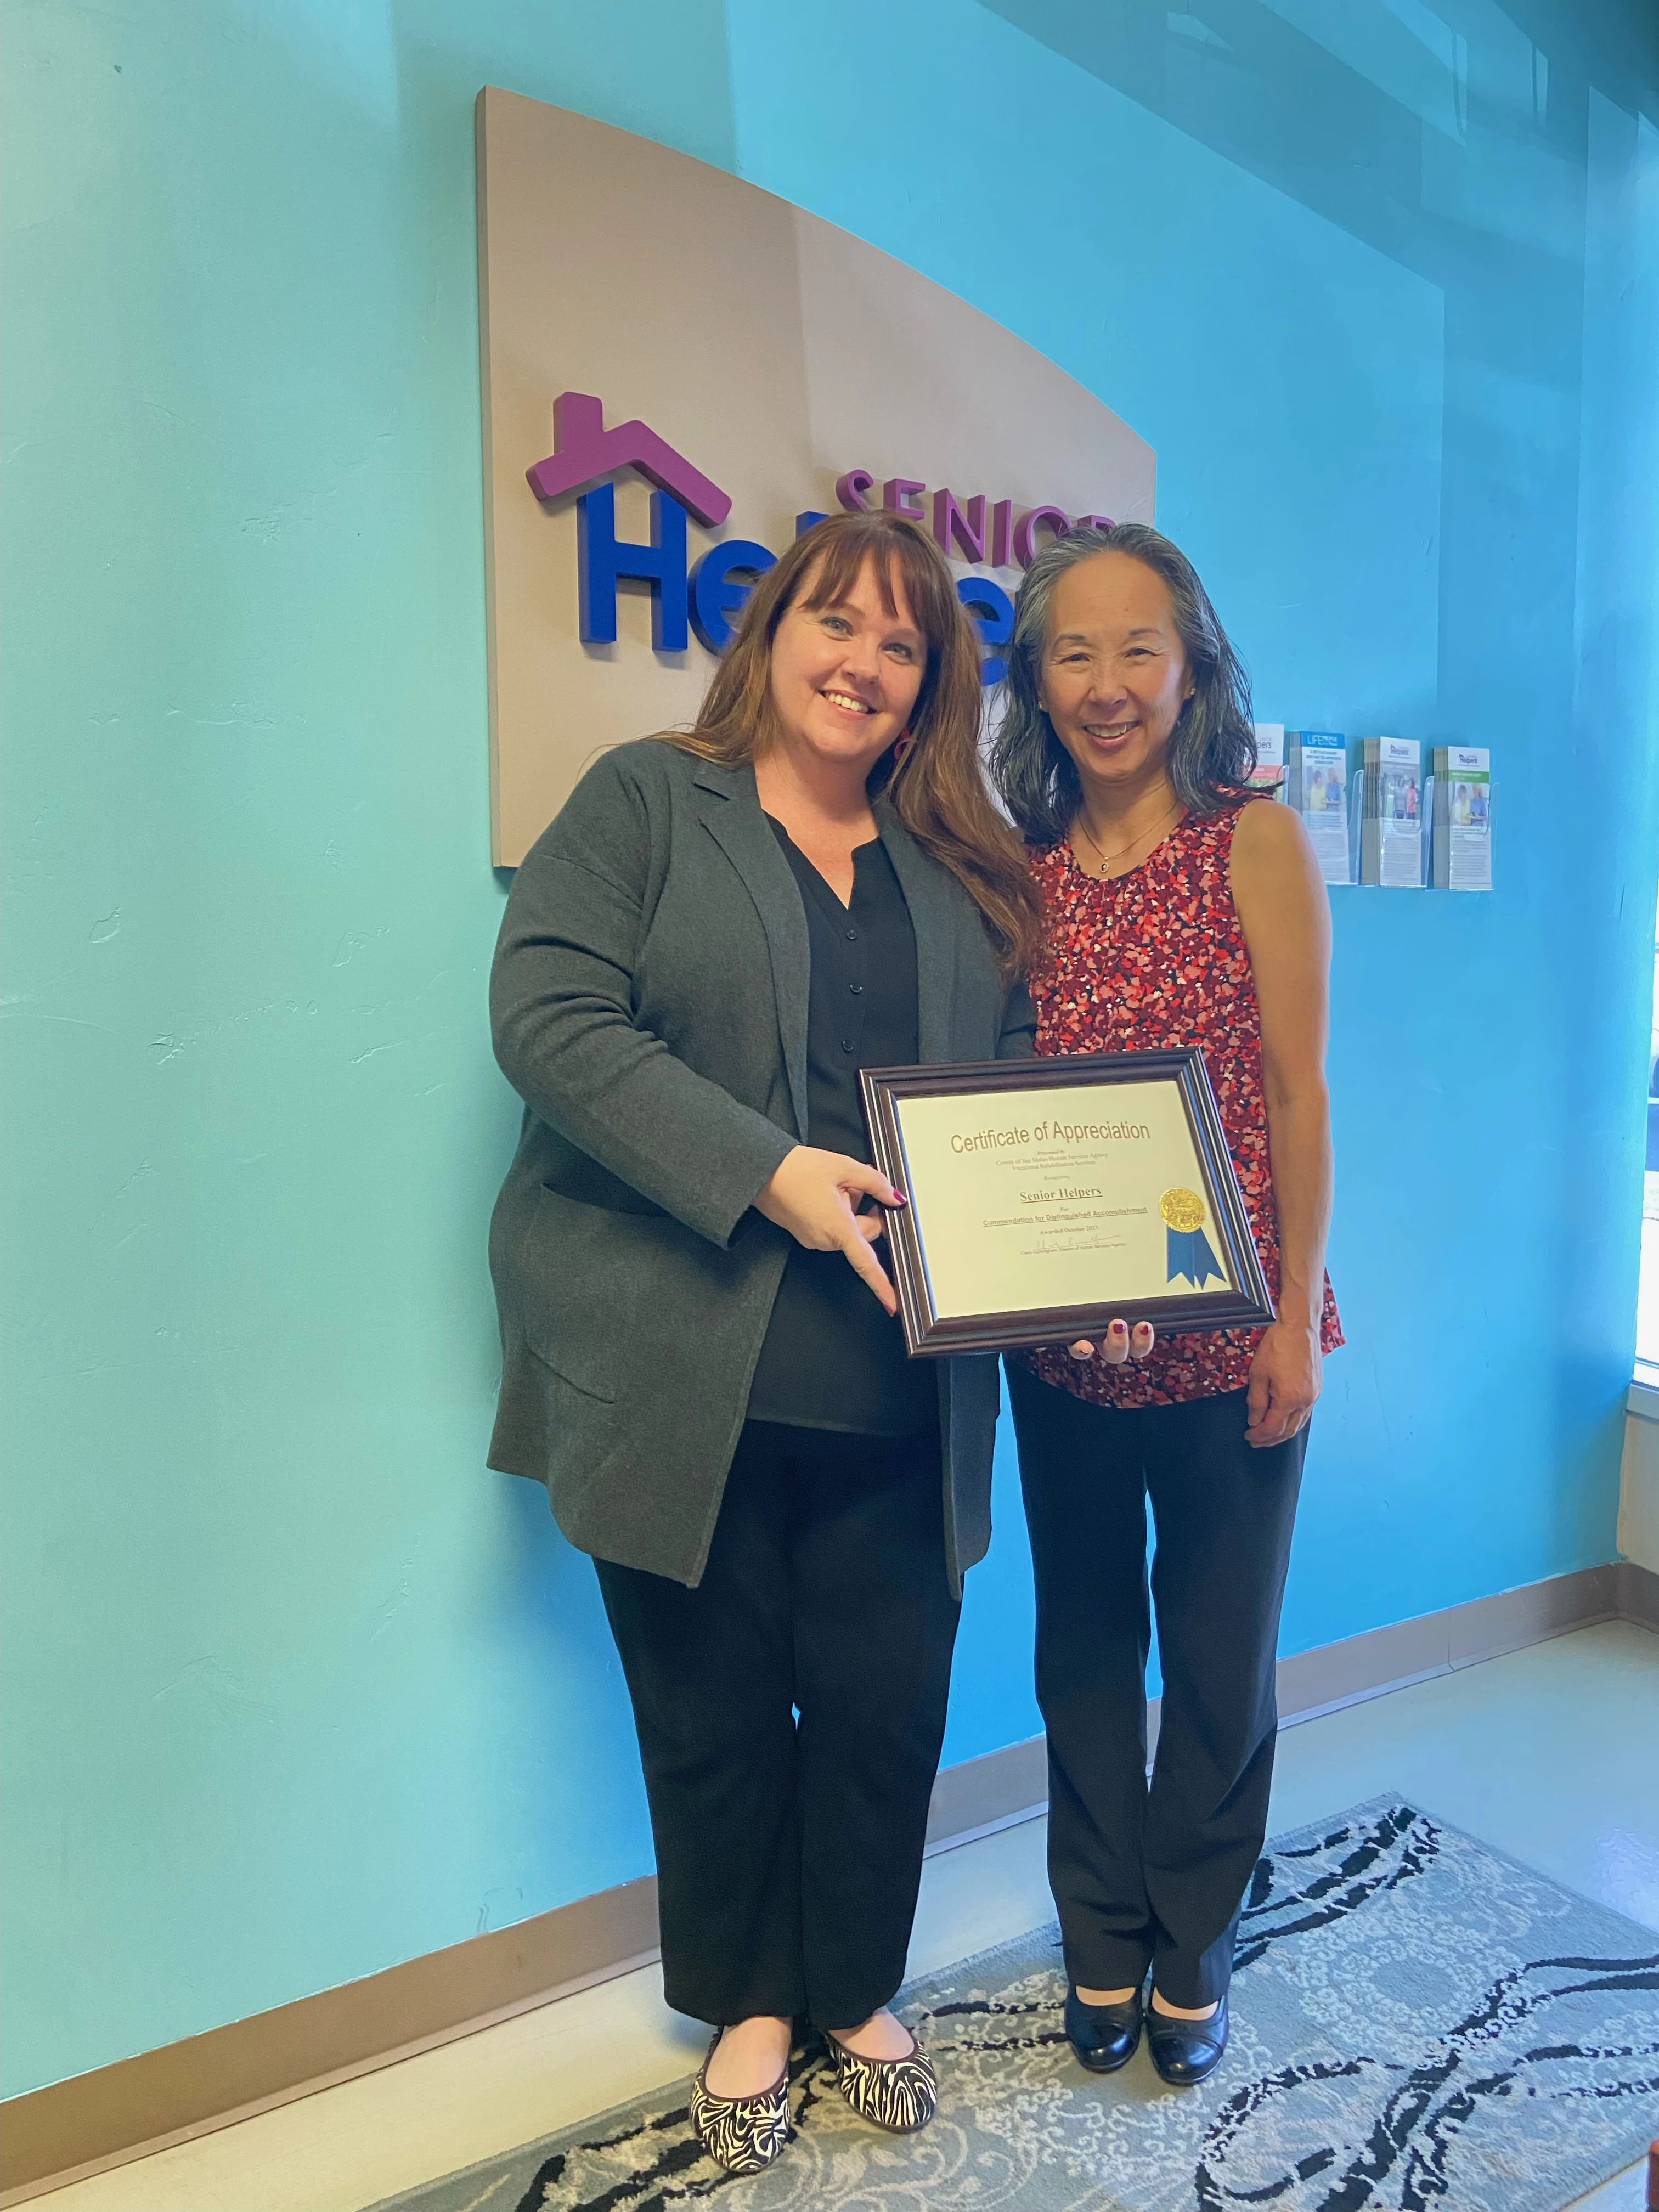 Kristina May presents Carol Mori (Caregiver Manager) the National Disability Employment Awareness Award. Carol works hard to find the right clients to place these employees with to make it a great fit for all.